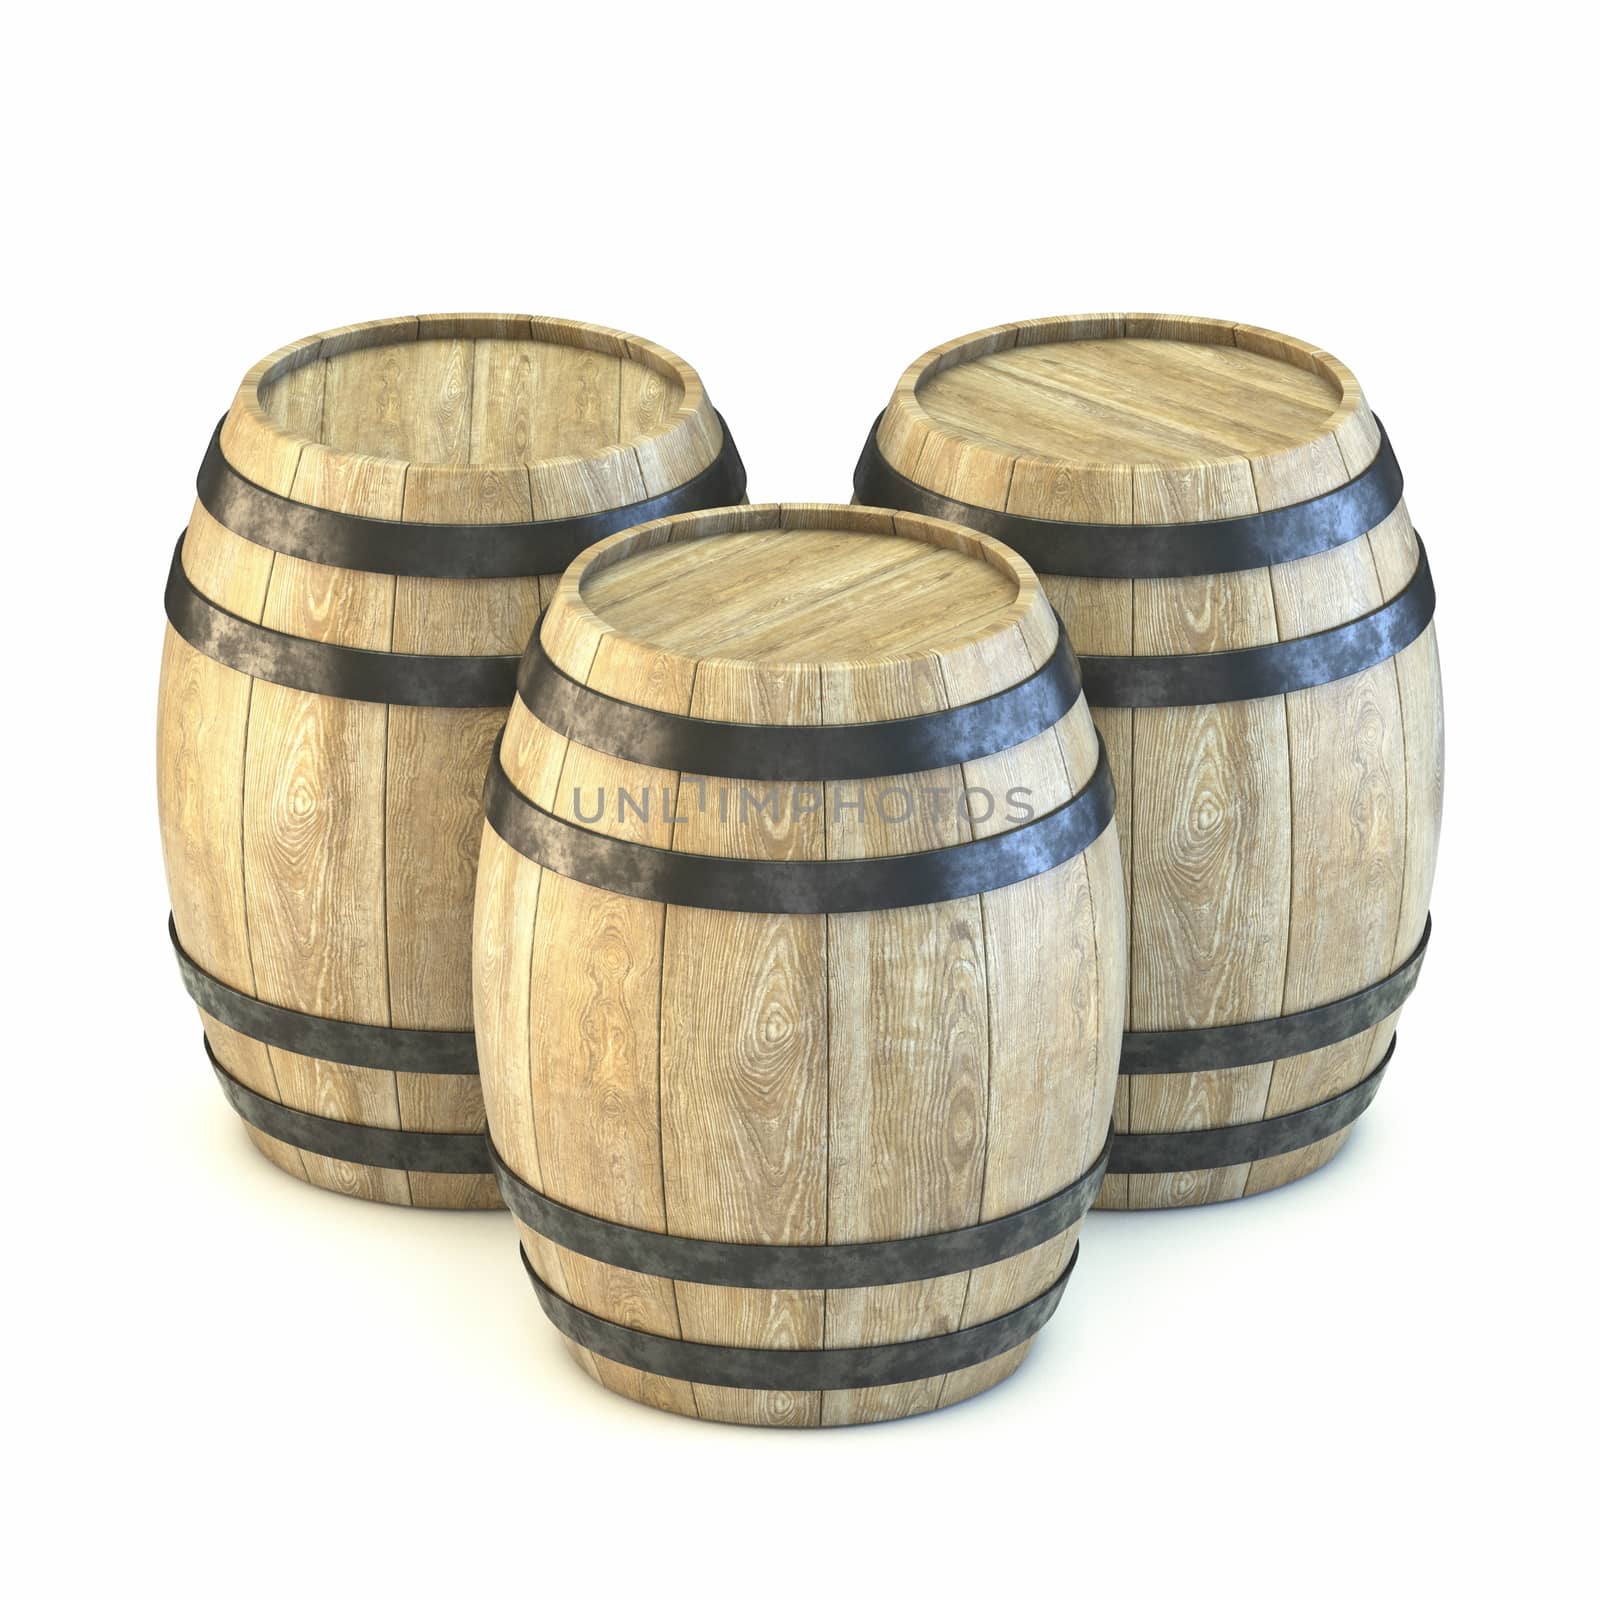 Three wooden barrels 3D render illustration isolated on white background